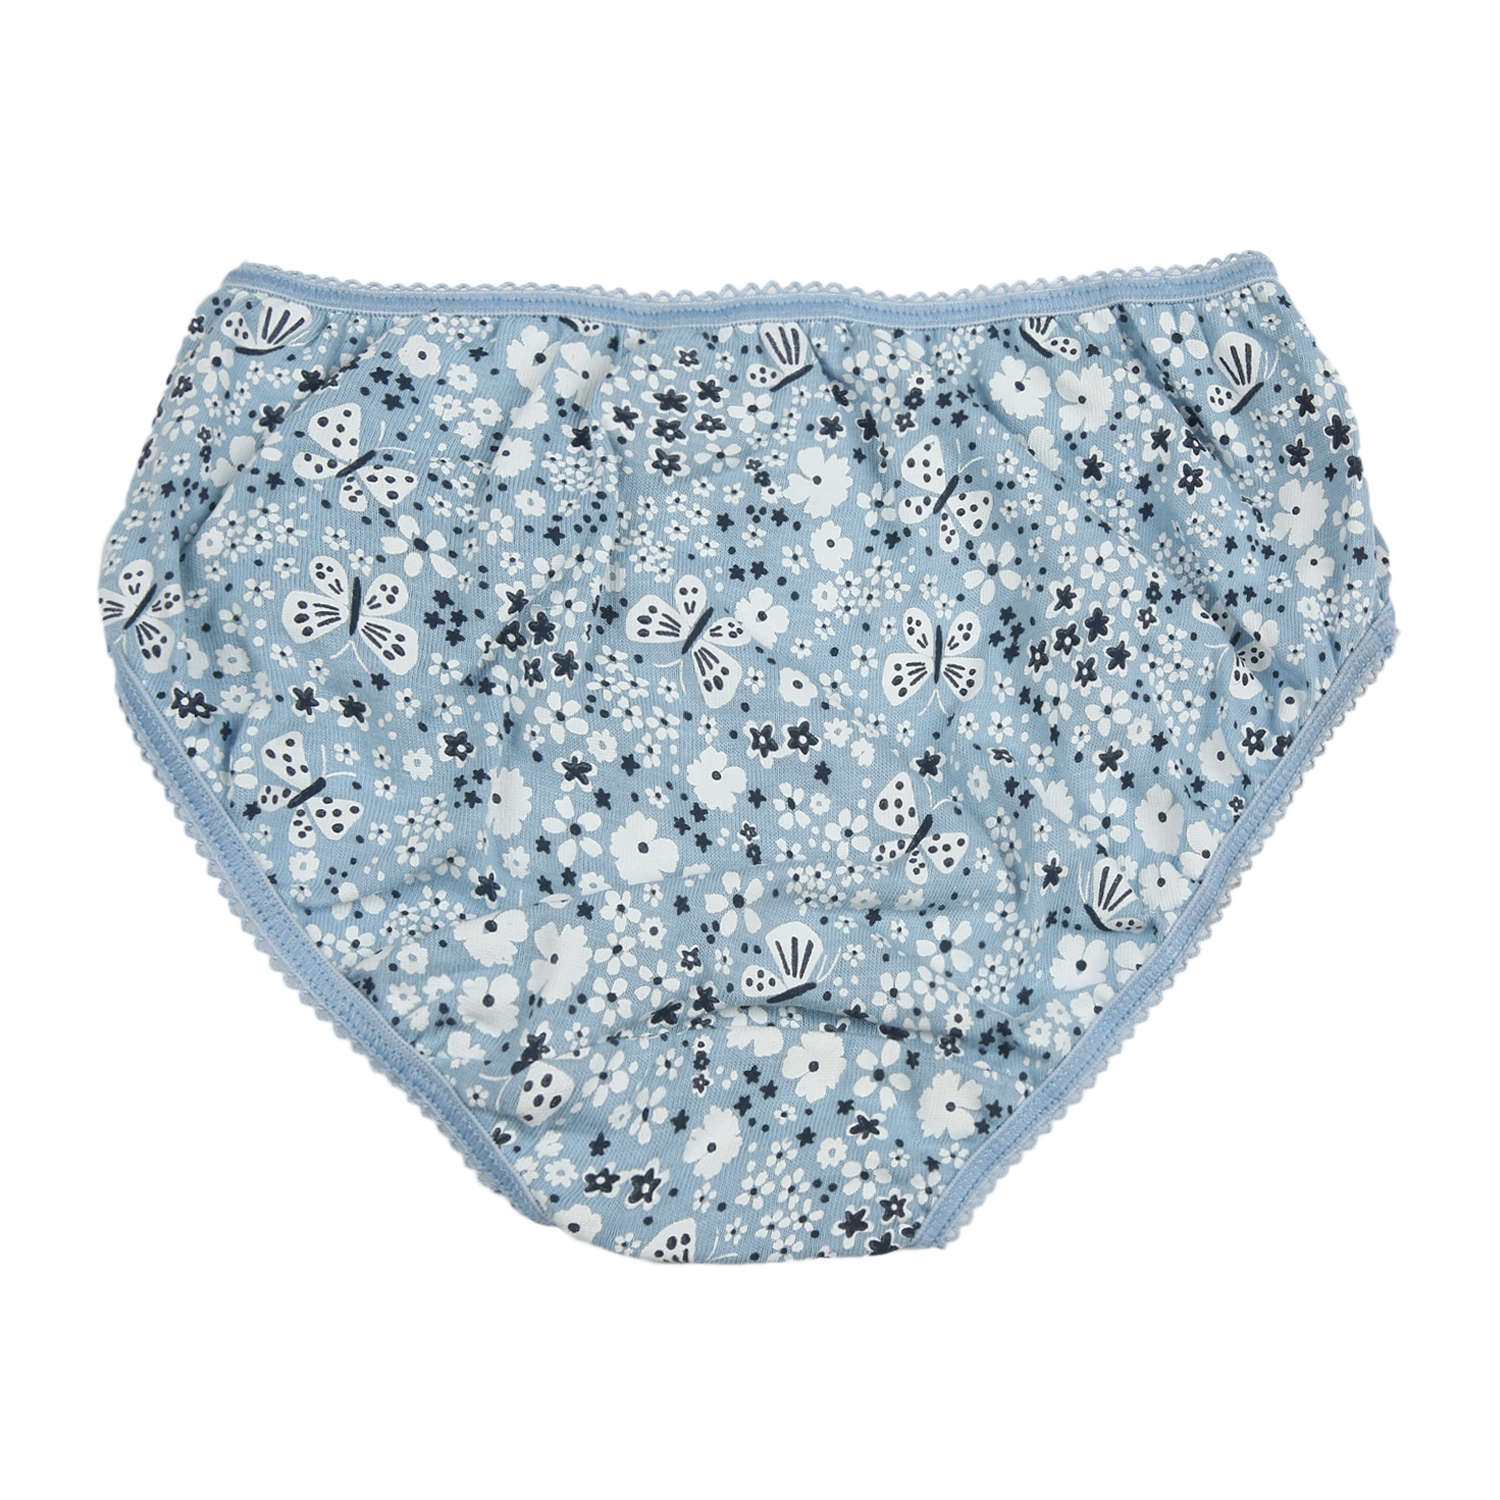 Mothercare | Girls Floral print Briefs - Pack of 3 - Blue white 2